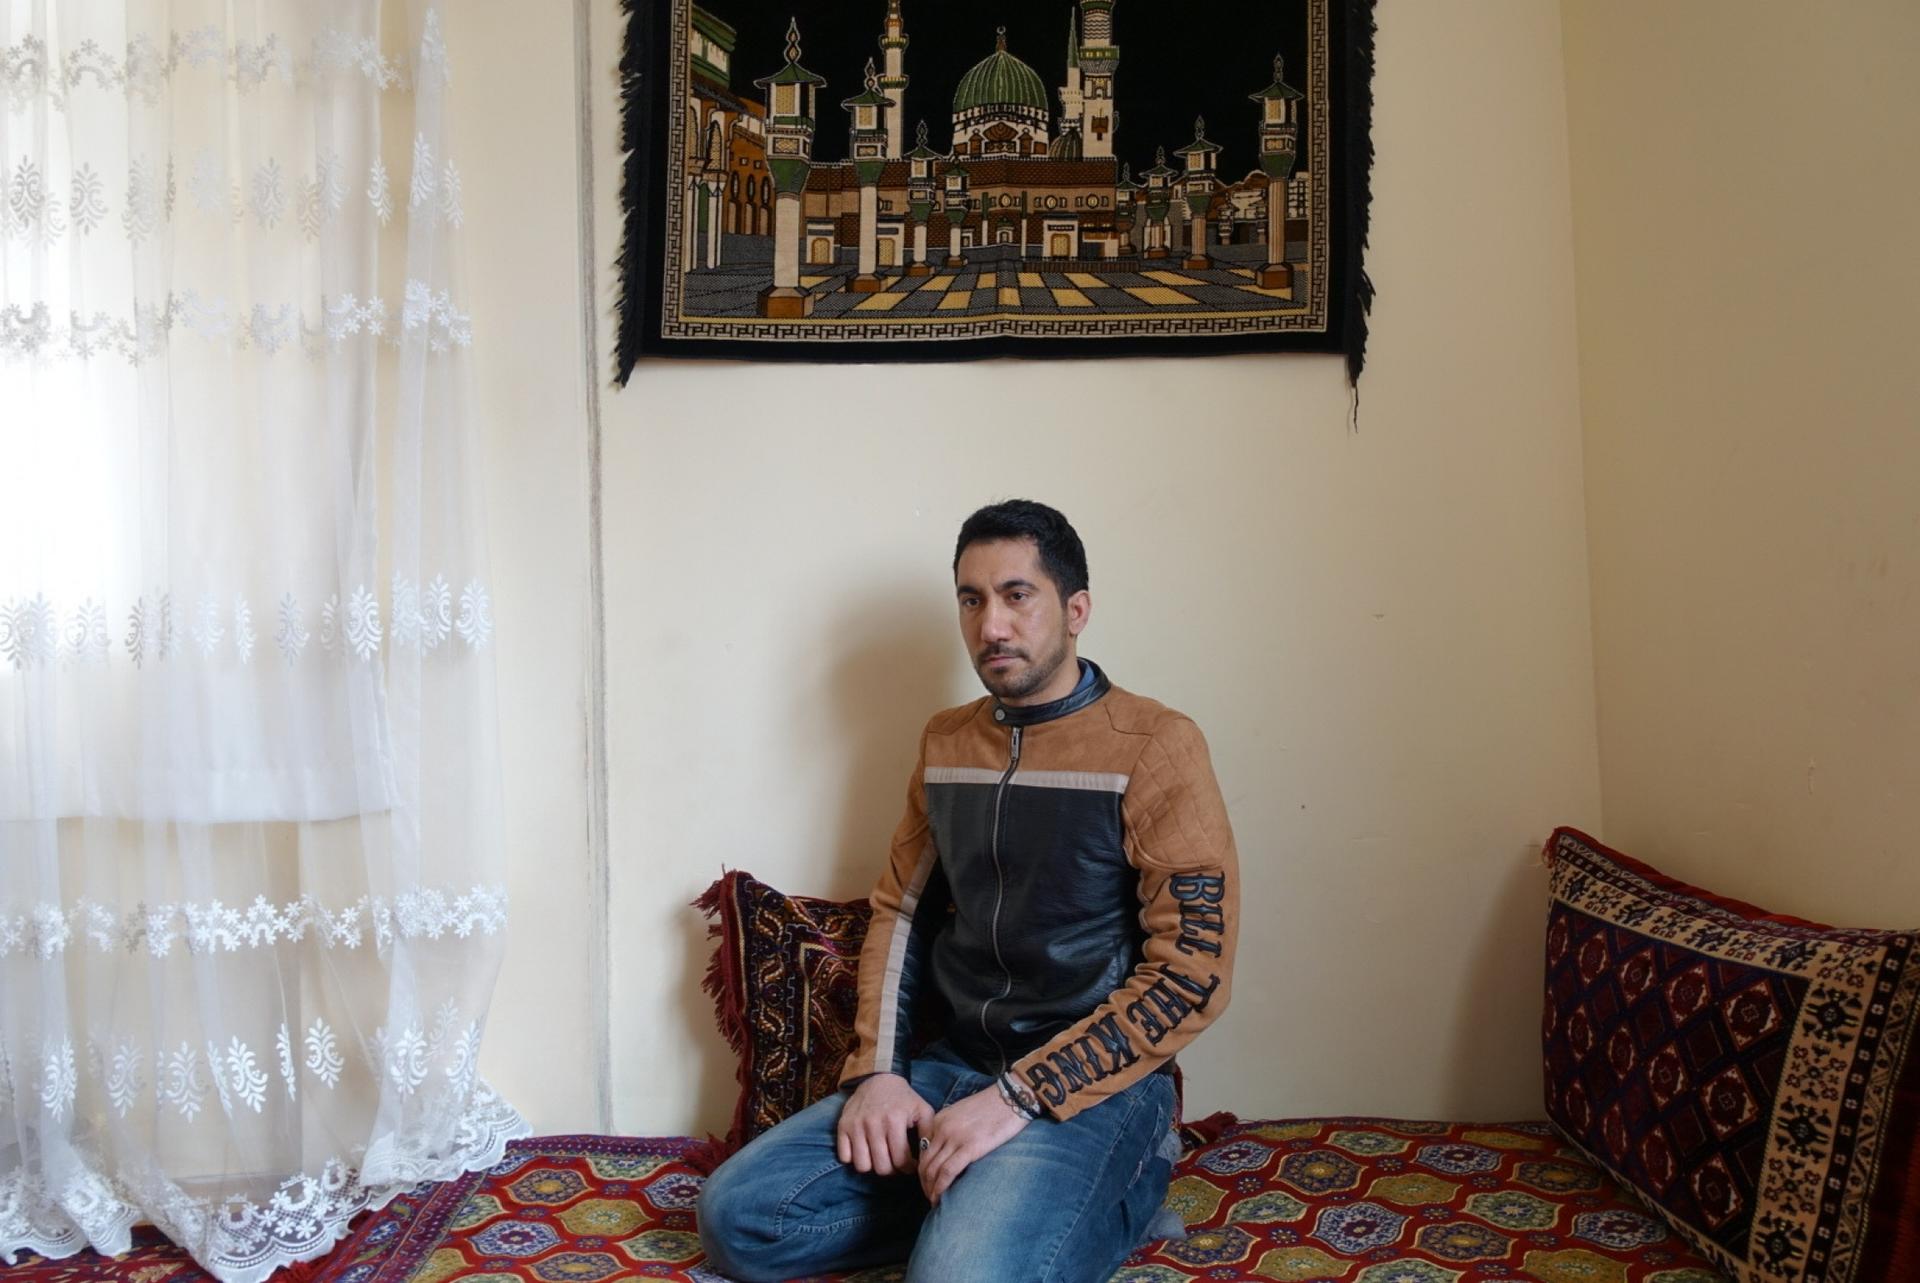 Jamil, 25, worked as a tailor in Afghanistan. But the Taliban threatened him because he made clothes for women as well as men.